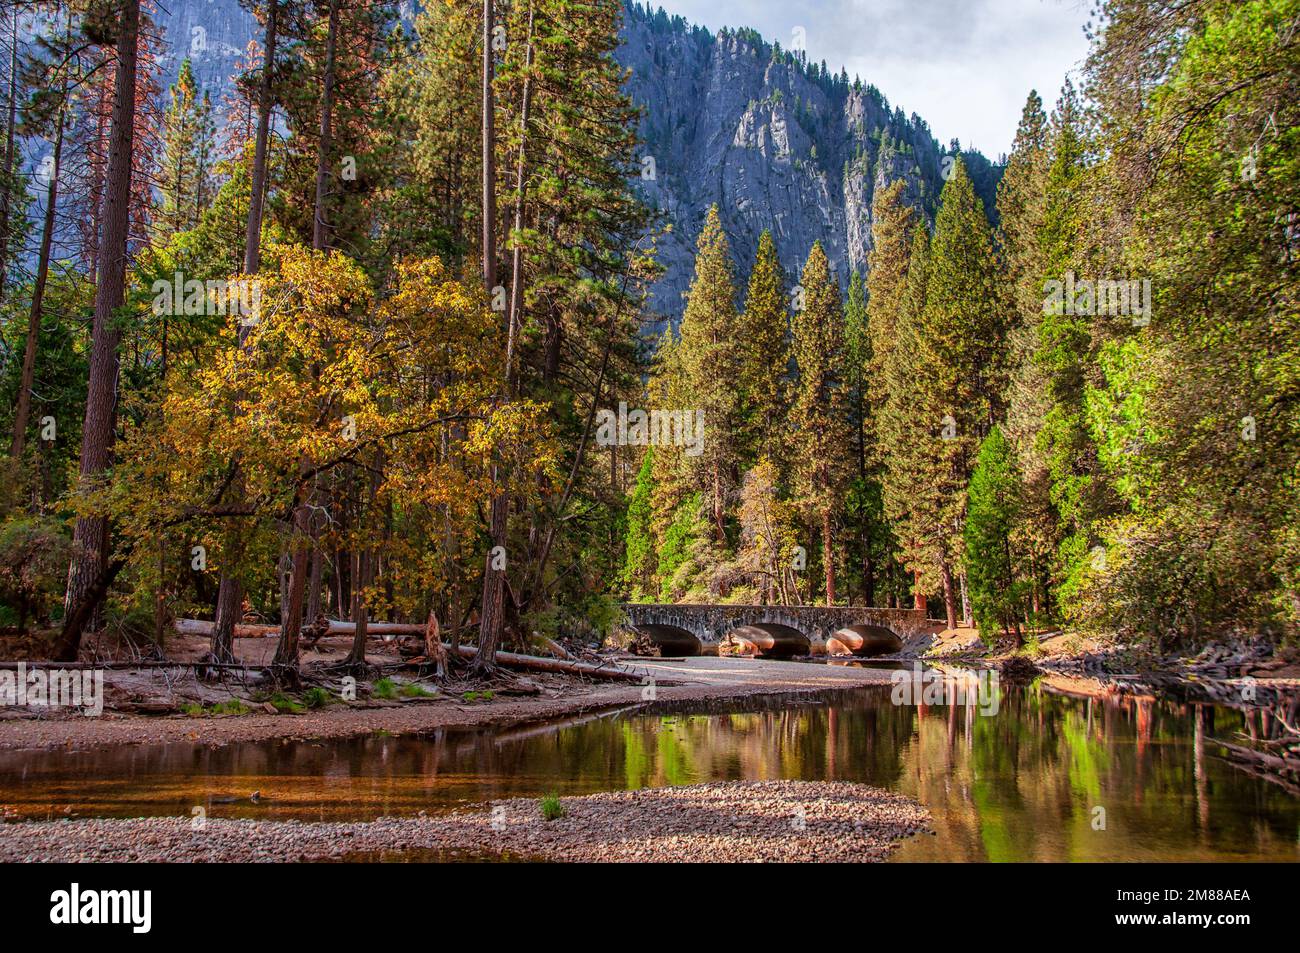 The forest colors are beautifully reflected in the Merced River as it flows towards a historic bridge. Stock Photo